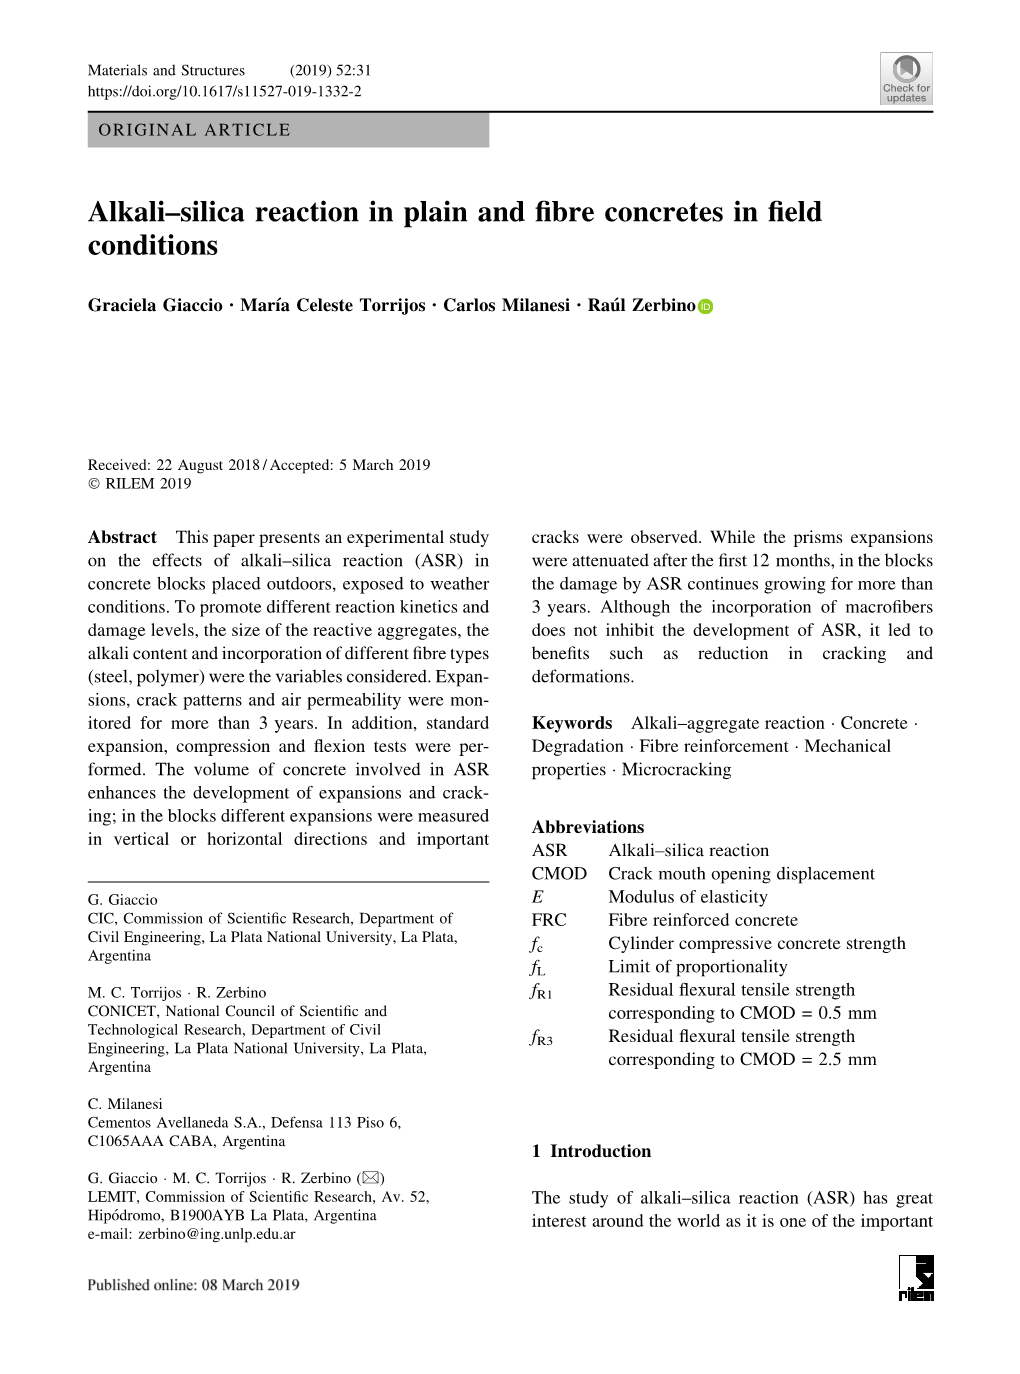 Alkali–Silica Reaction in Plain and Fibre Concretes in Field Conditions